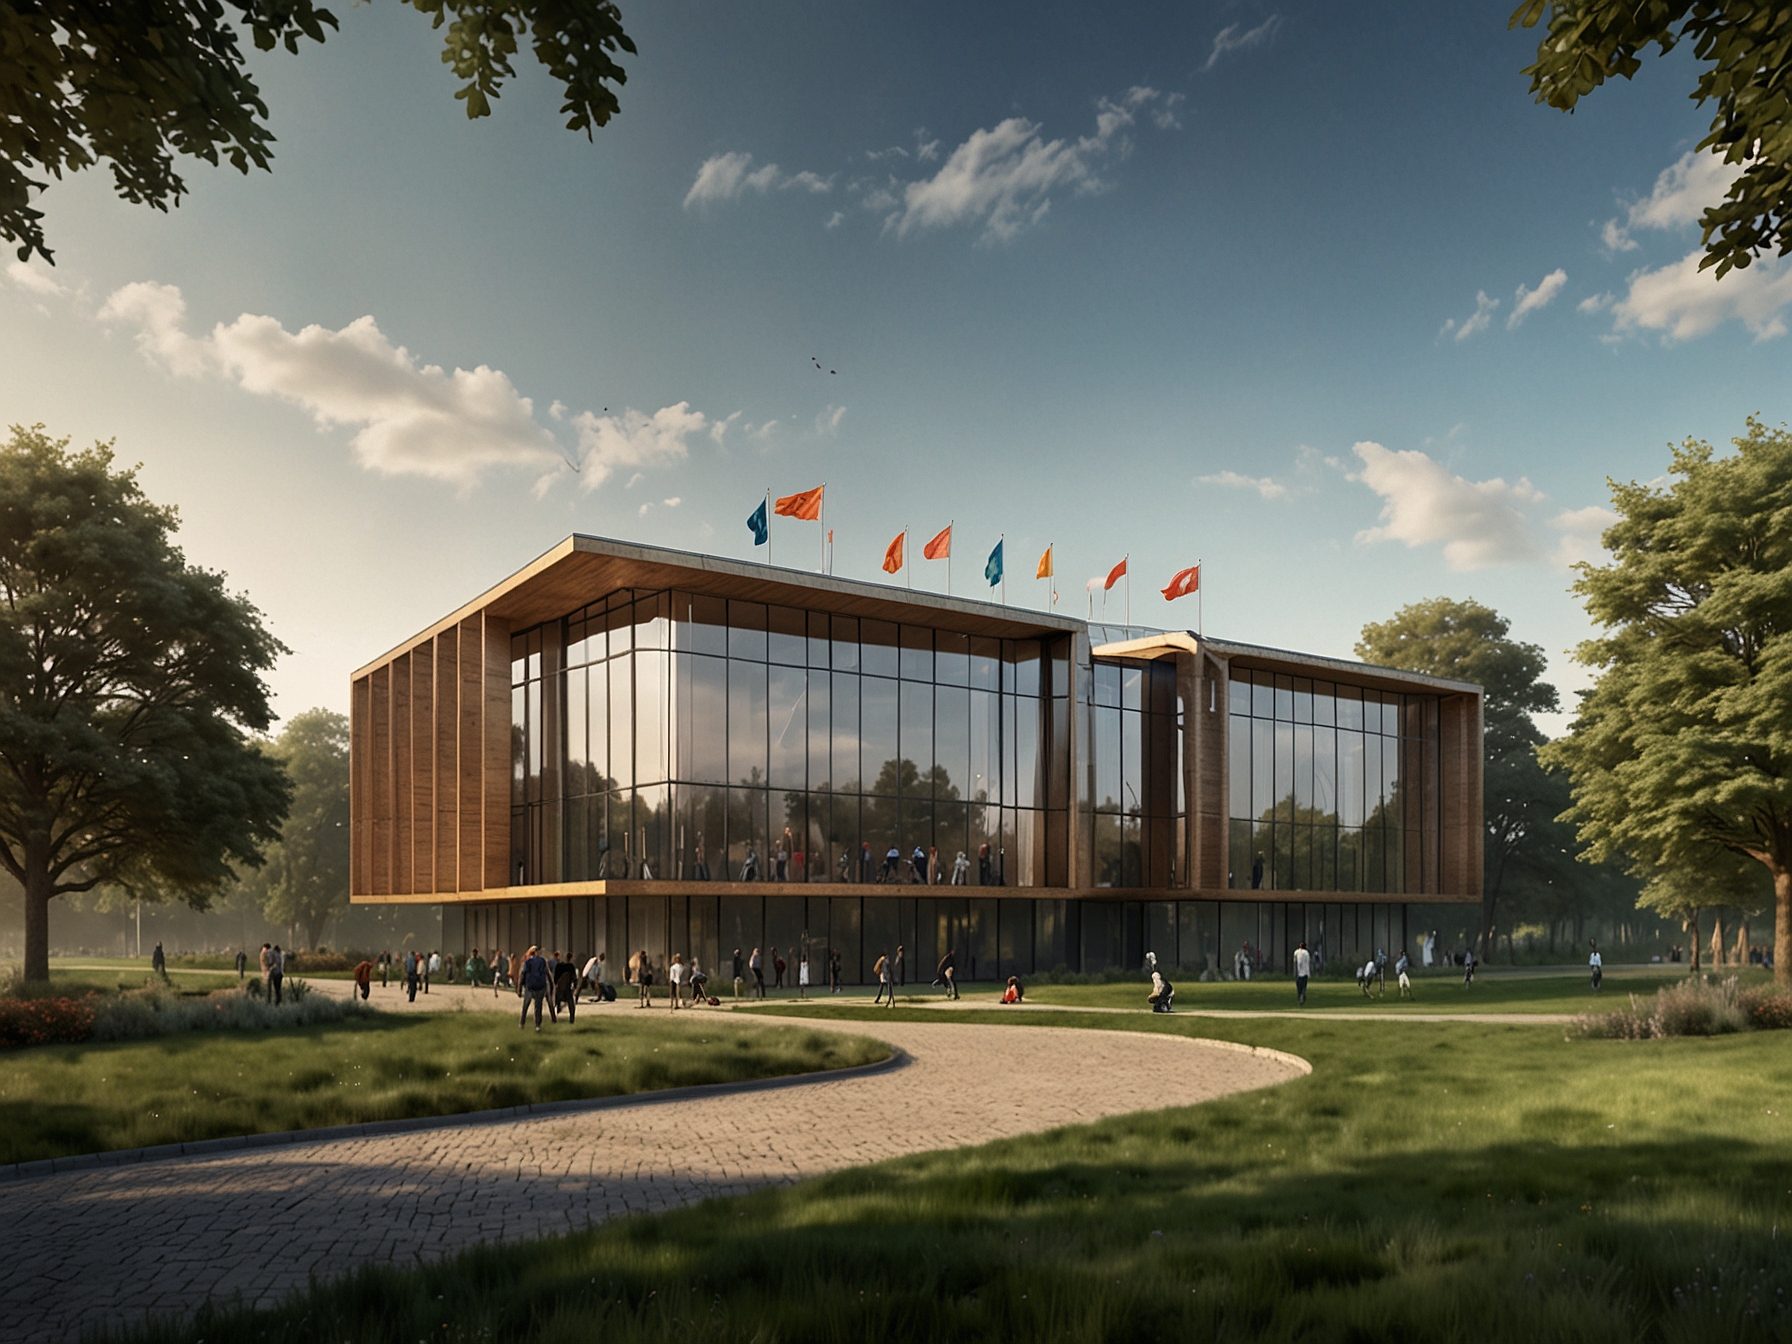 An image of the Dutch Olympic Committee headquarters with its logo, highlighting the governance body responsible for the controversial decision to exclude top Dutch golfers from the Olympics.